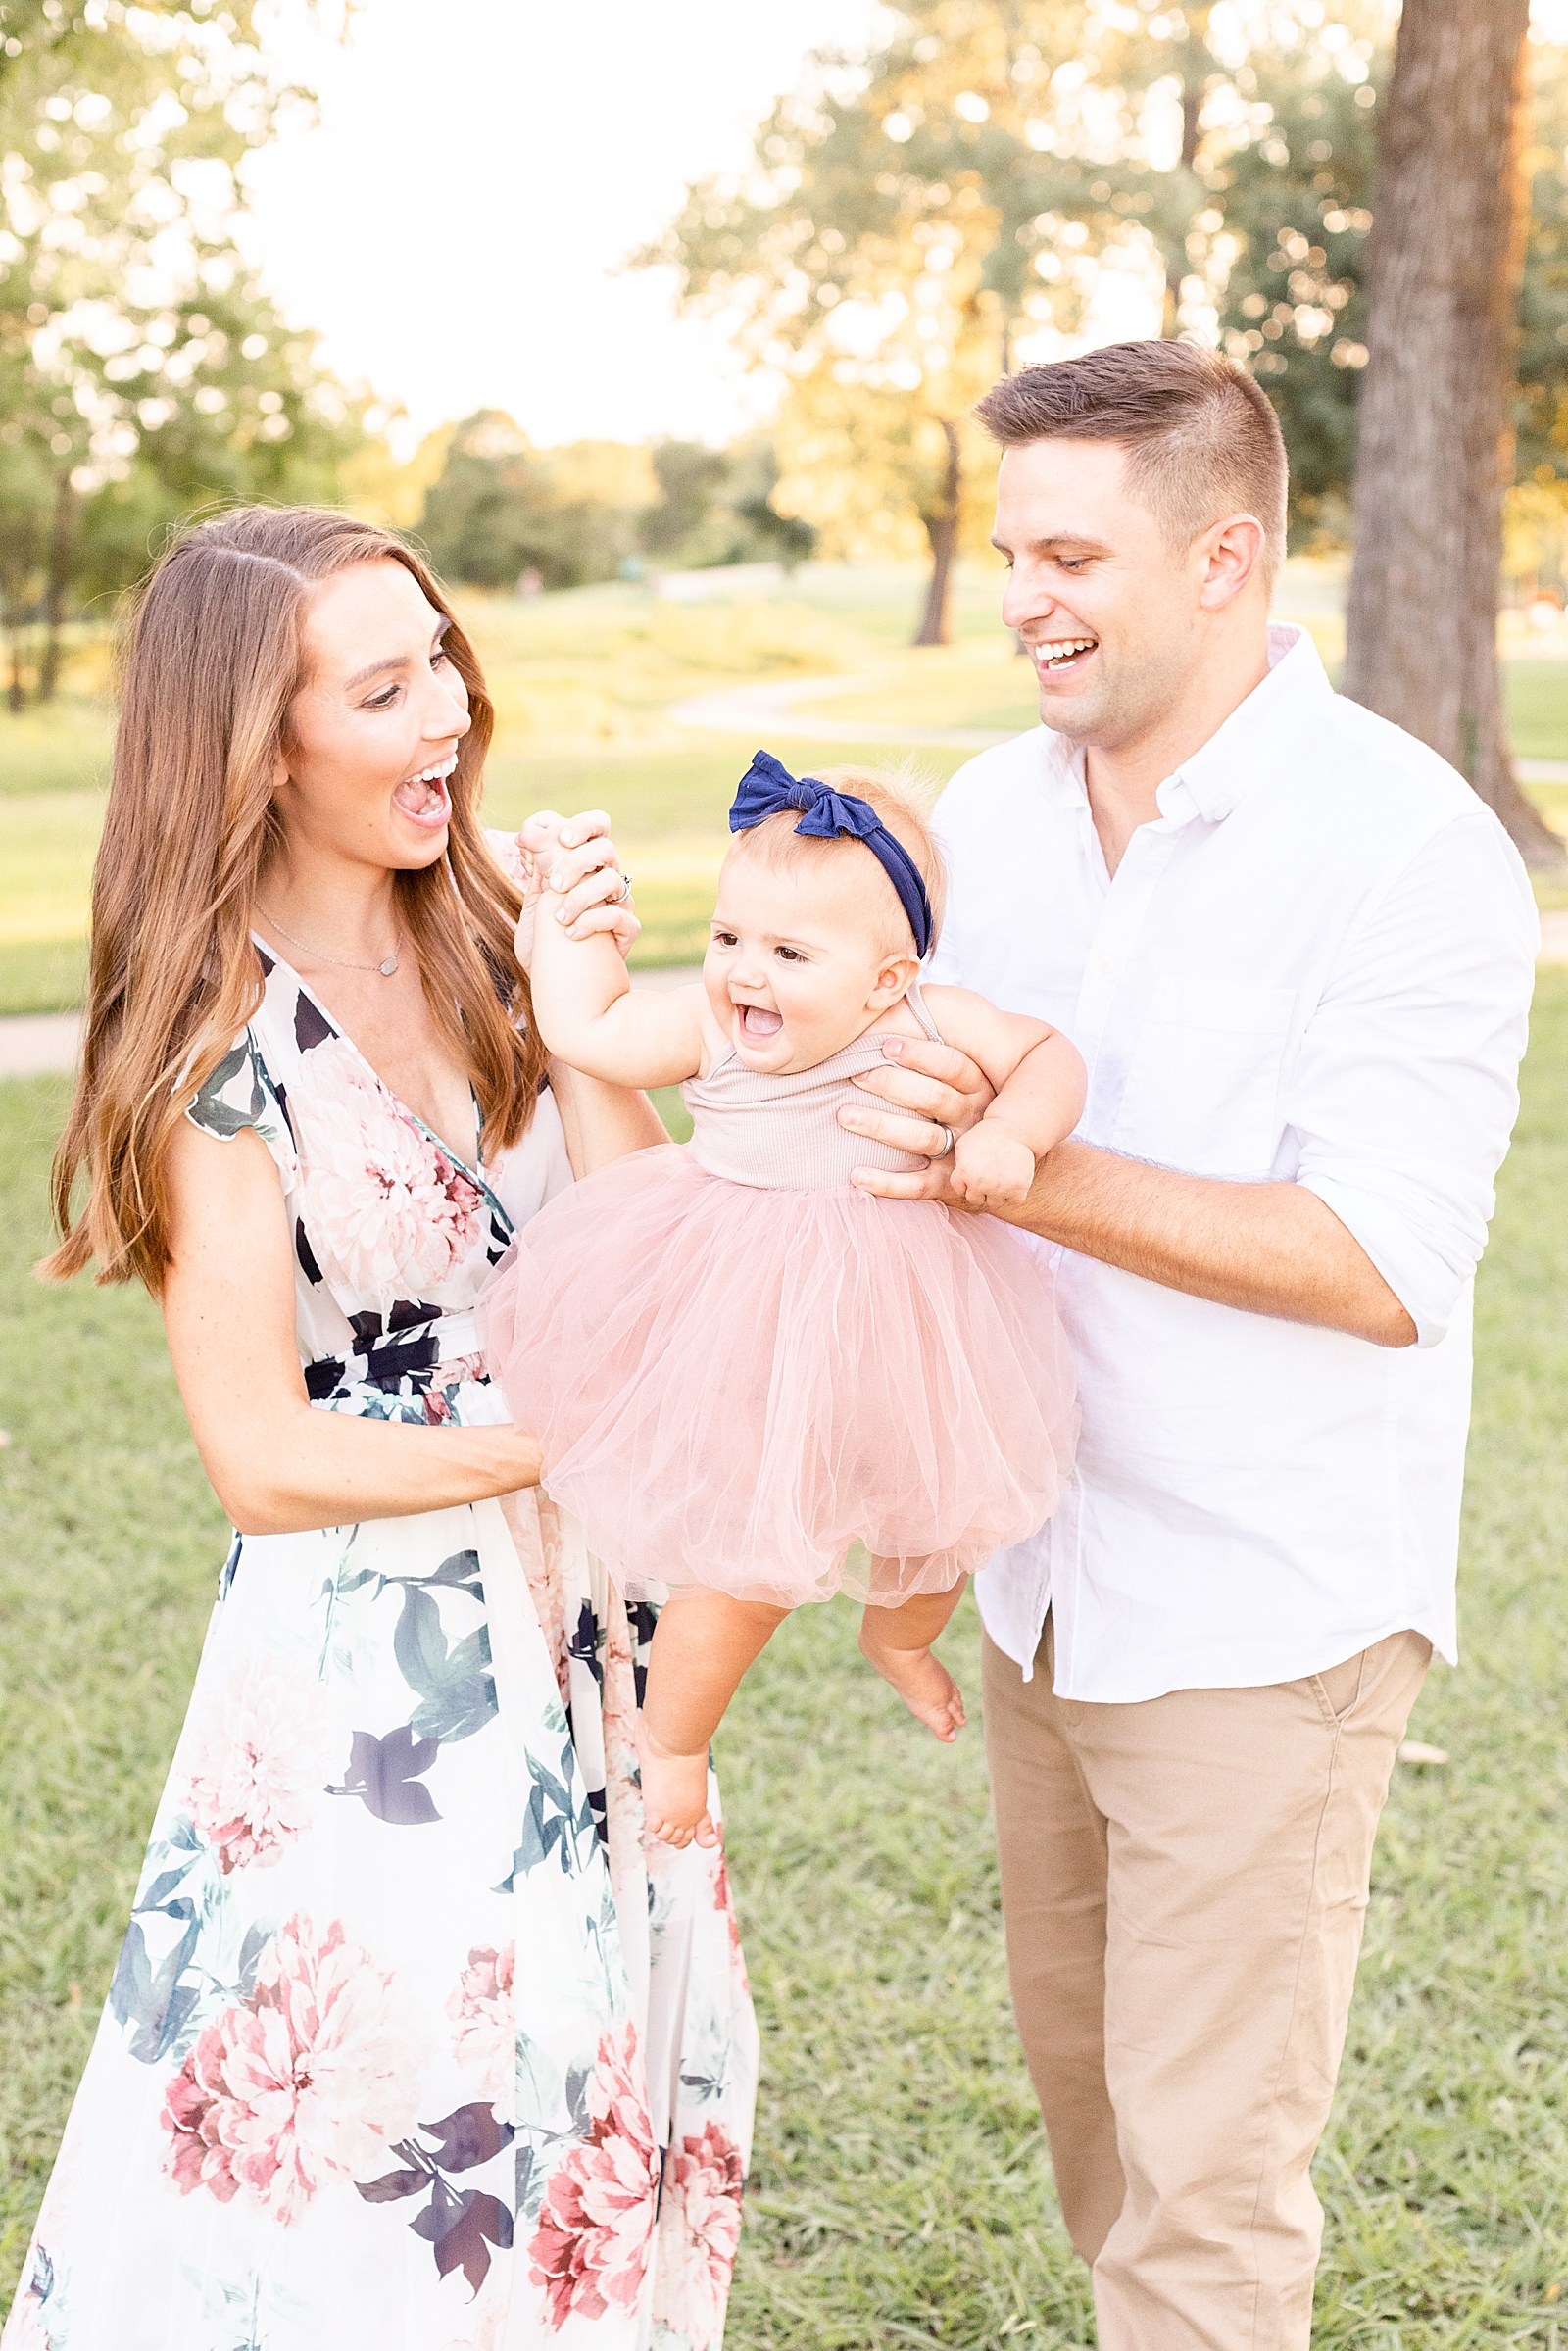 mom and dad hold baby and swing her around to get her to smile wearing her pink tutu dress and navy blue bow